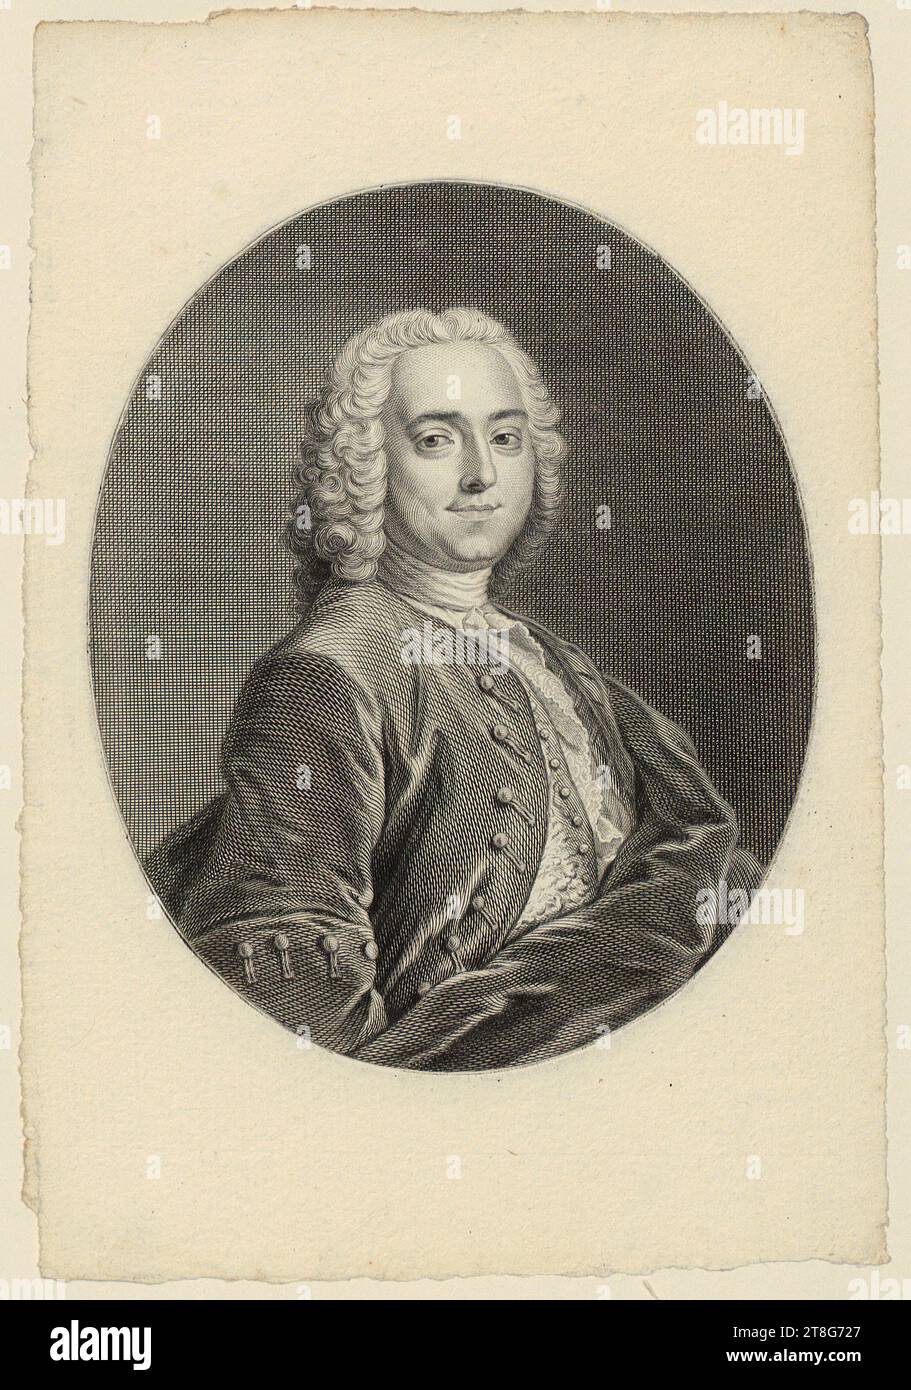 Johann Georg Wille (1715 - 1808), Portrait of Lescalopier, Intendant of Montauban, Creation of the print medium: 1730 - 1808, copperplate engraving, sheet size: 21.7 x 14.9 cm plate margin: 15.3 x 12.4 cm (oval), verso at lower center inscribed in pen and brown 'J. S. 1840'; verso at lower left dealer's note in graphite 'mdo, mvf Stock Photo